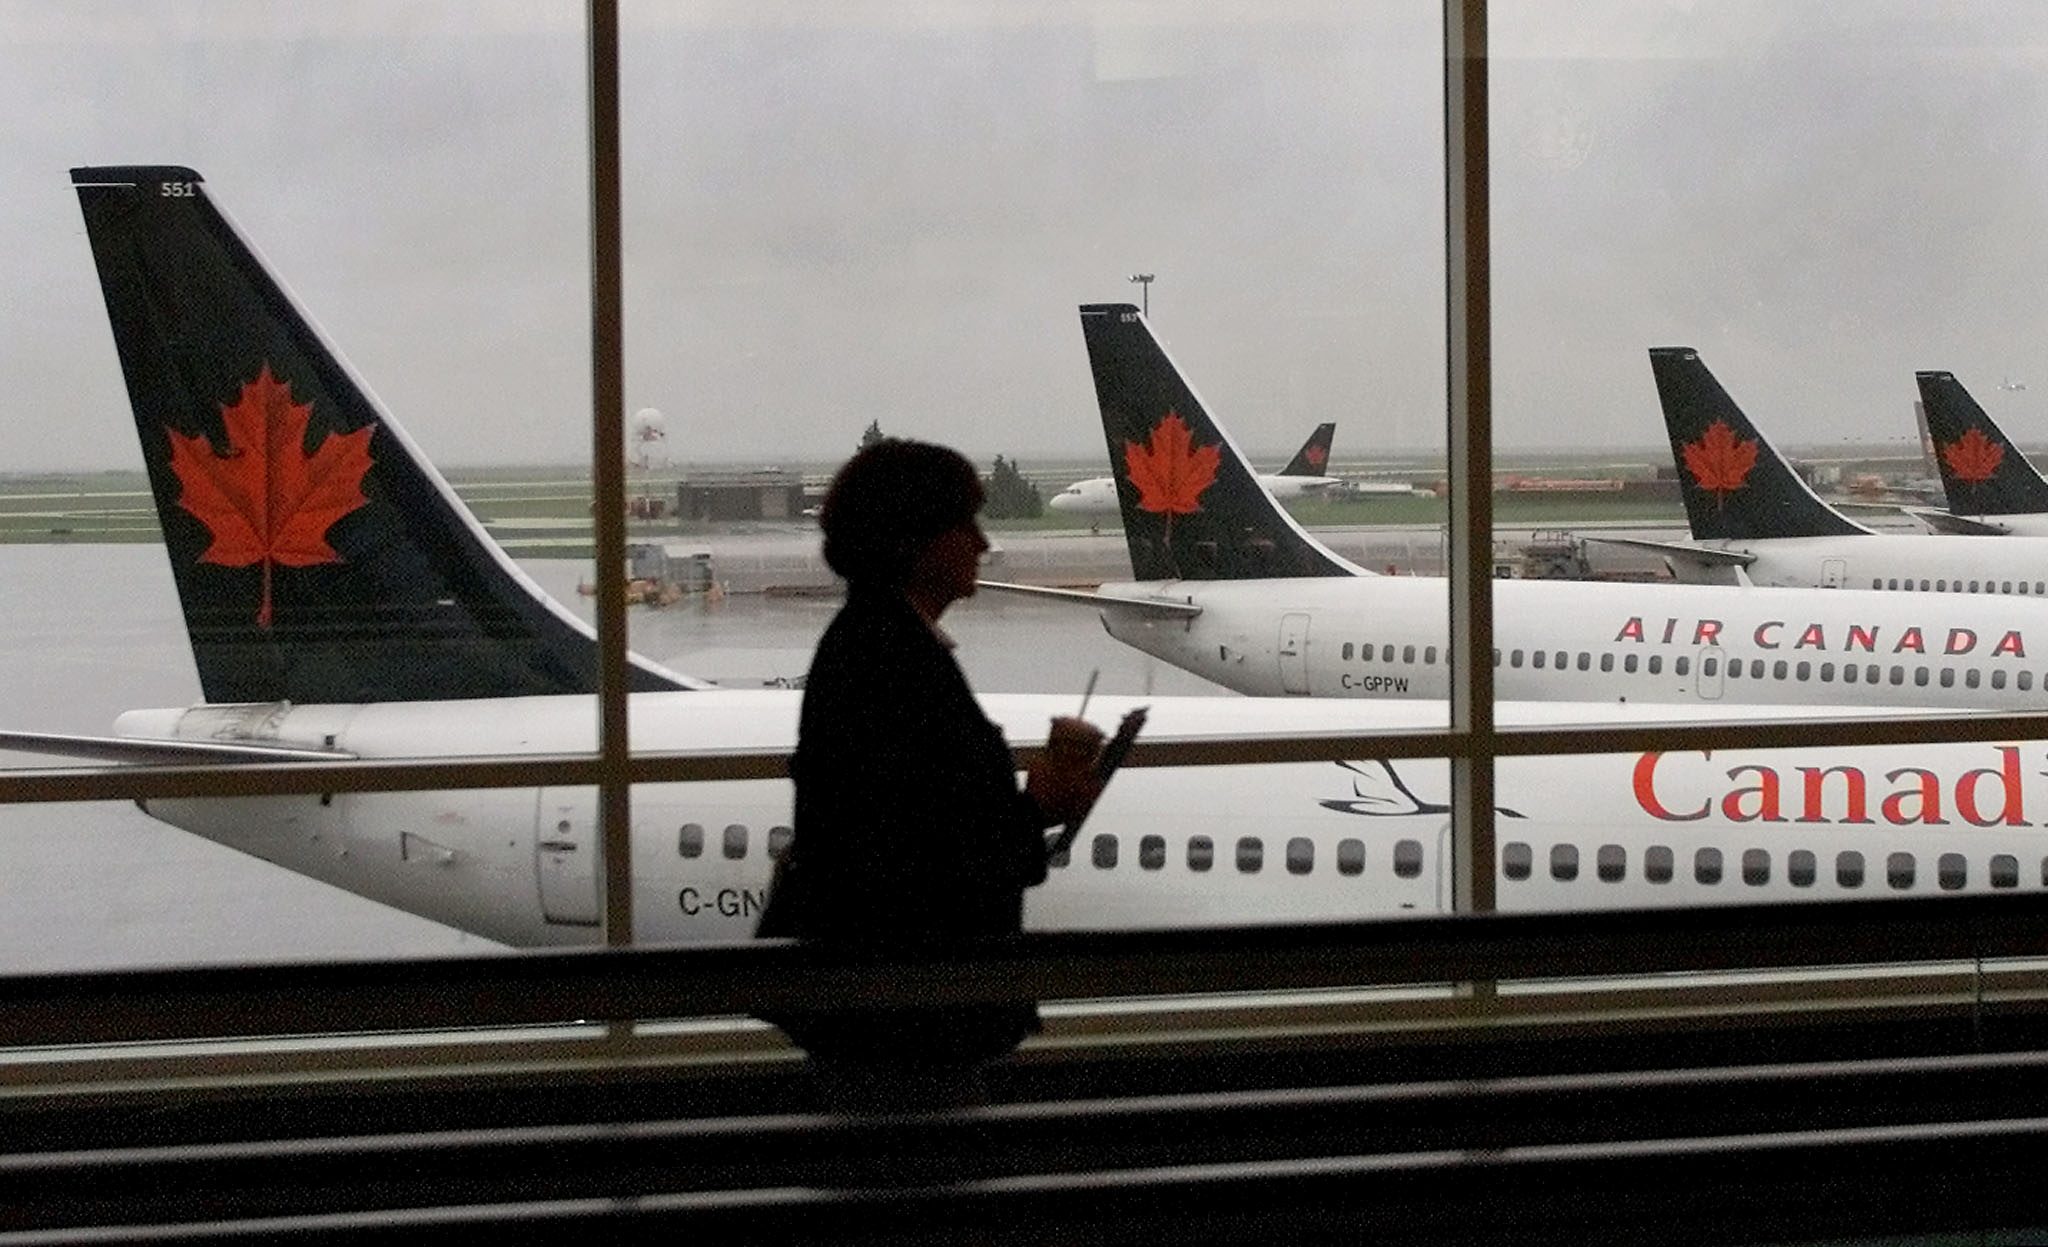 Air Canada agrees to $4.5-million settlement over delayed US passenger refunds